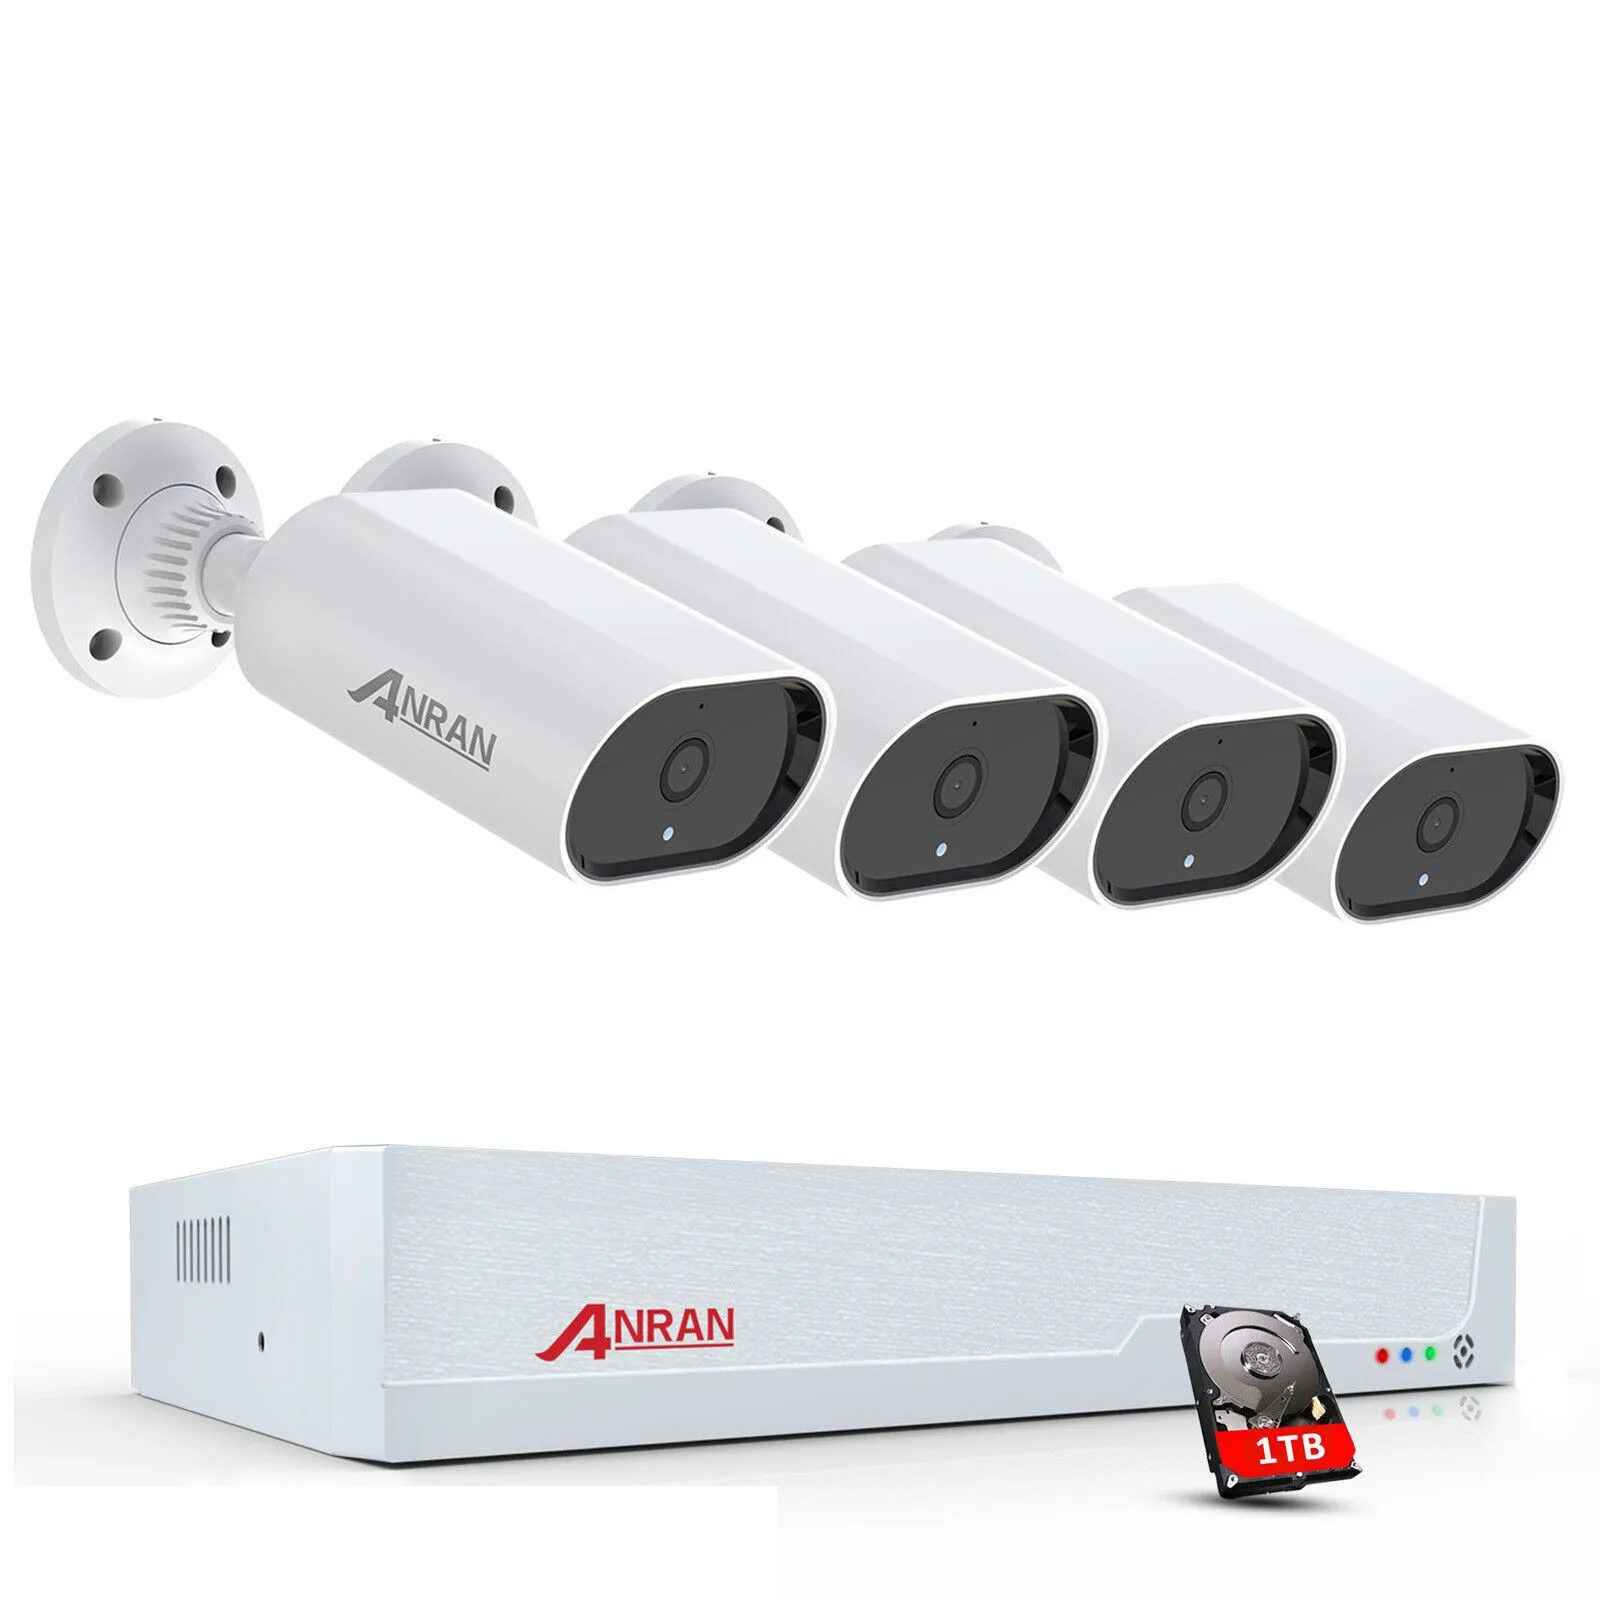 ANRAN 5MP PoE Surveillance Kit with Motion detection and instant Email alert